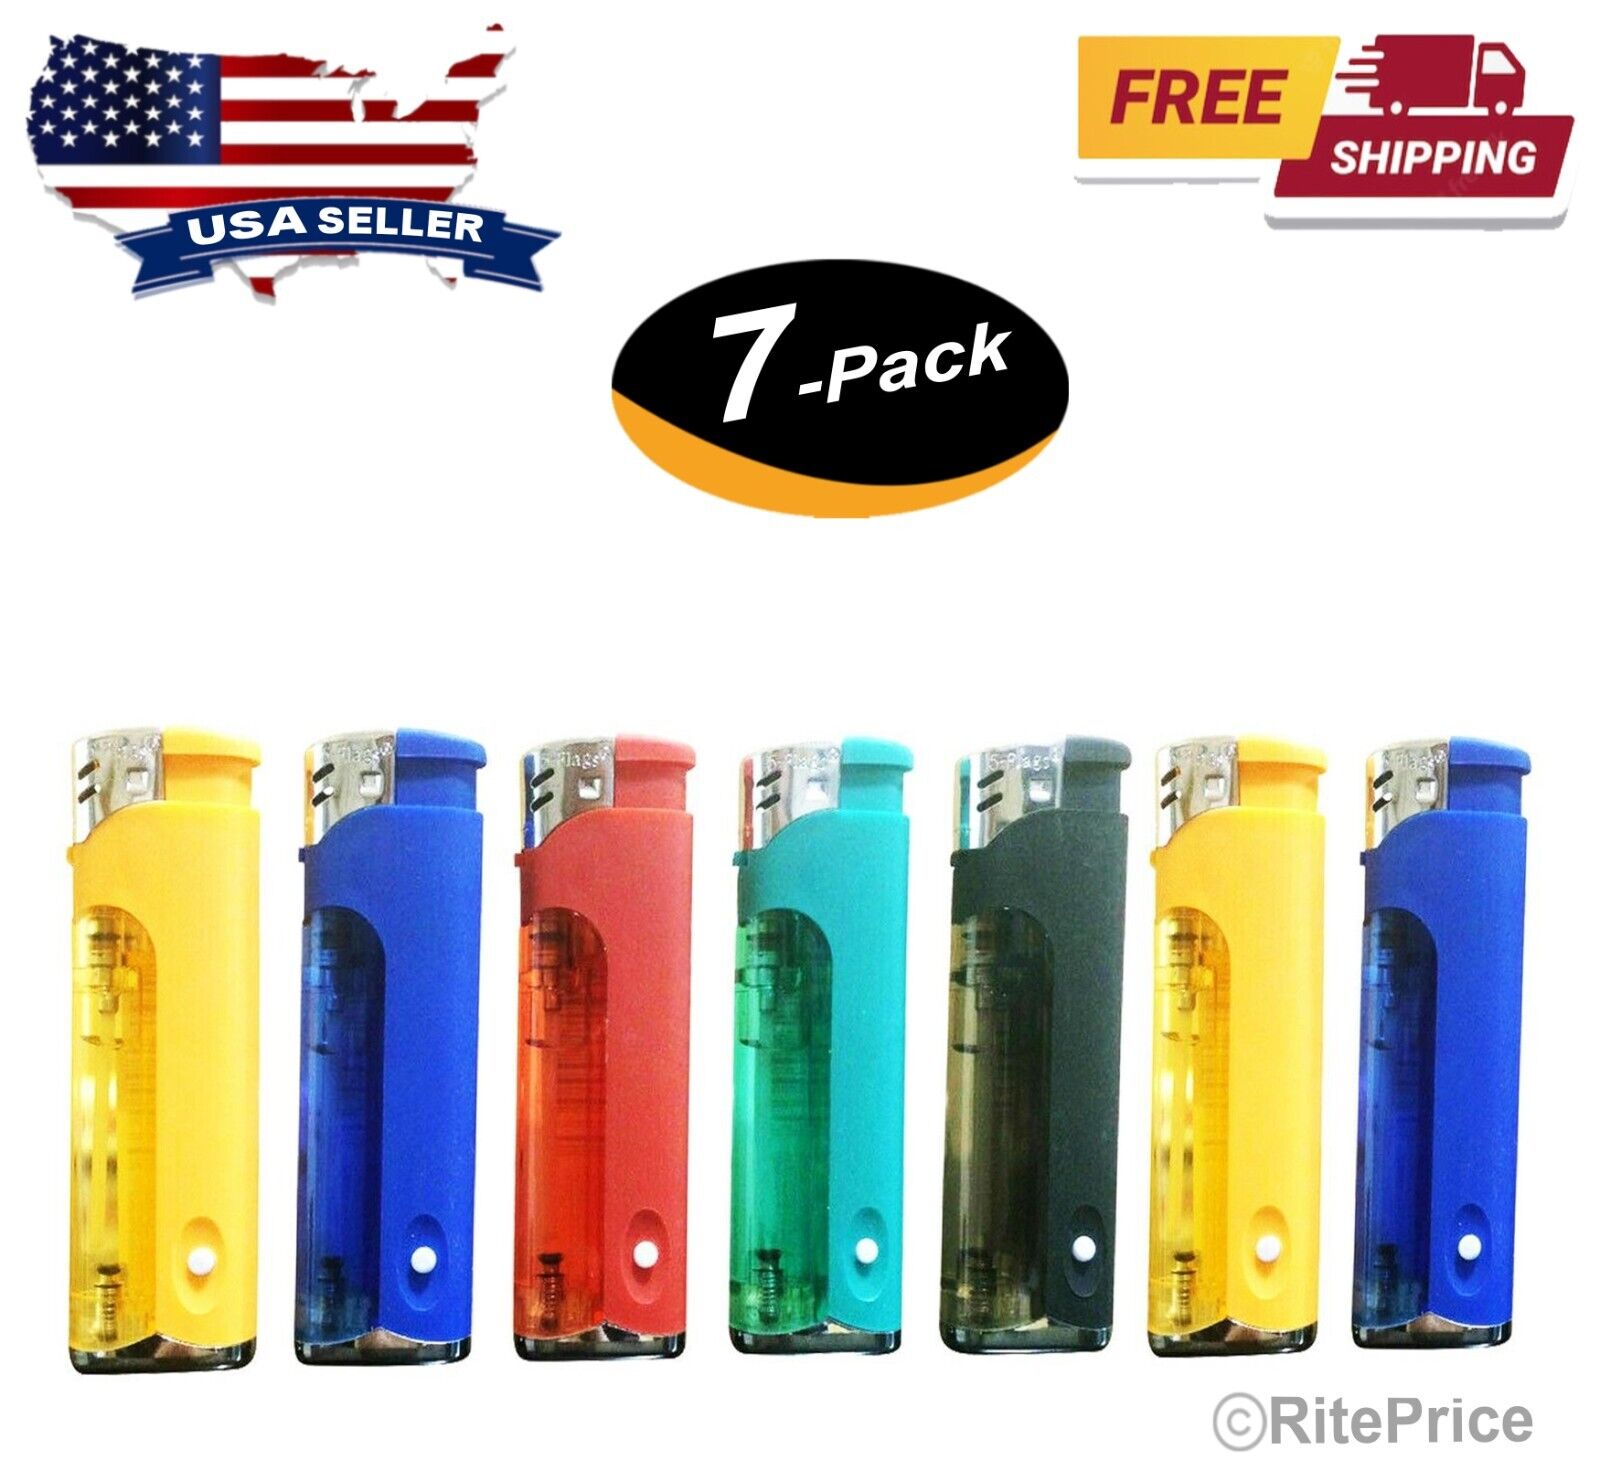 (7 Lighters) 5-Flags Refillable Butane Flame (Colored LED Flashlight), AST Color